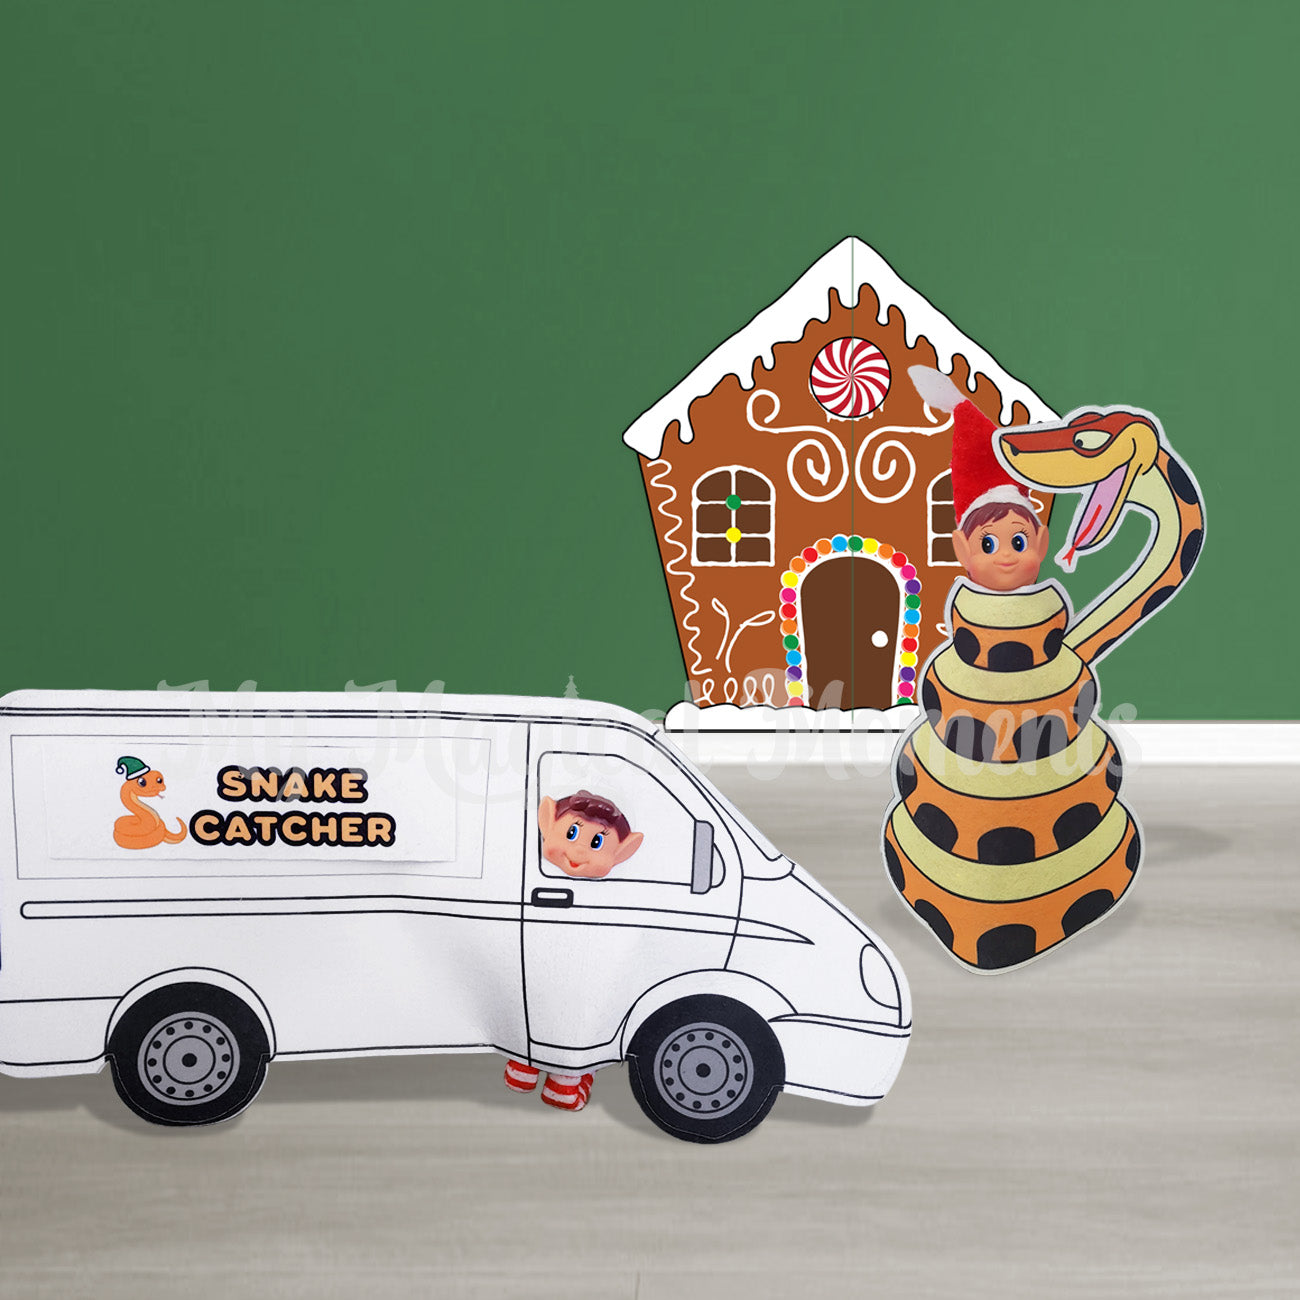 Elf dressed as snake catcher van at a gingerbread home to catch a snake eating an elf